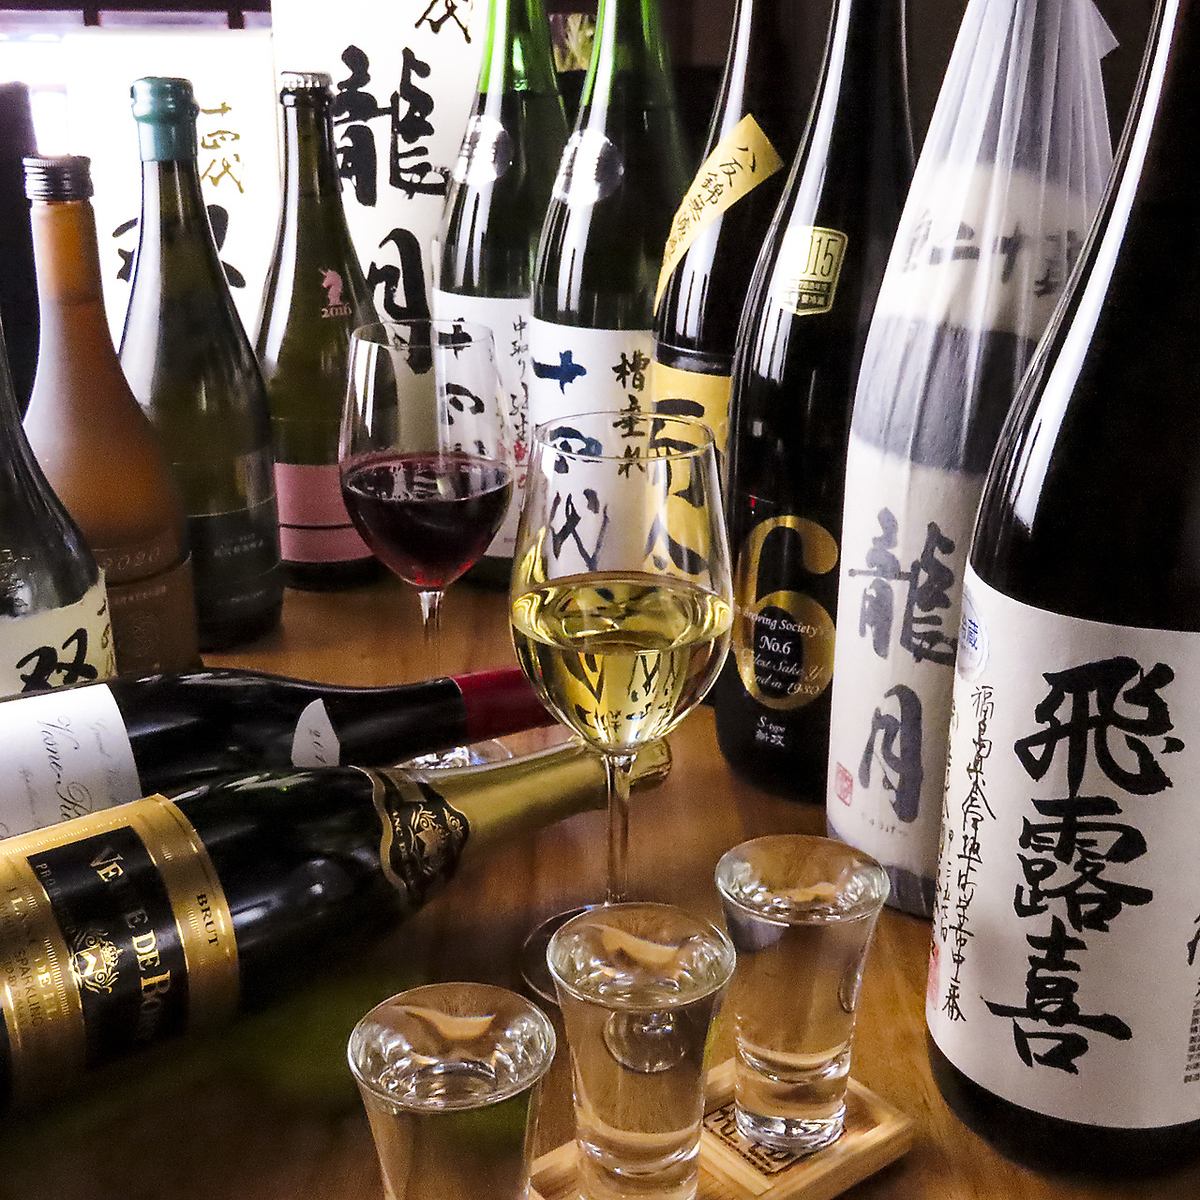 A must-have for Japanese sake lovers♪ We have many options available!